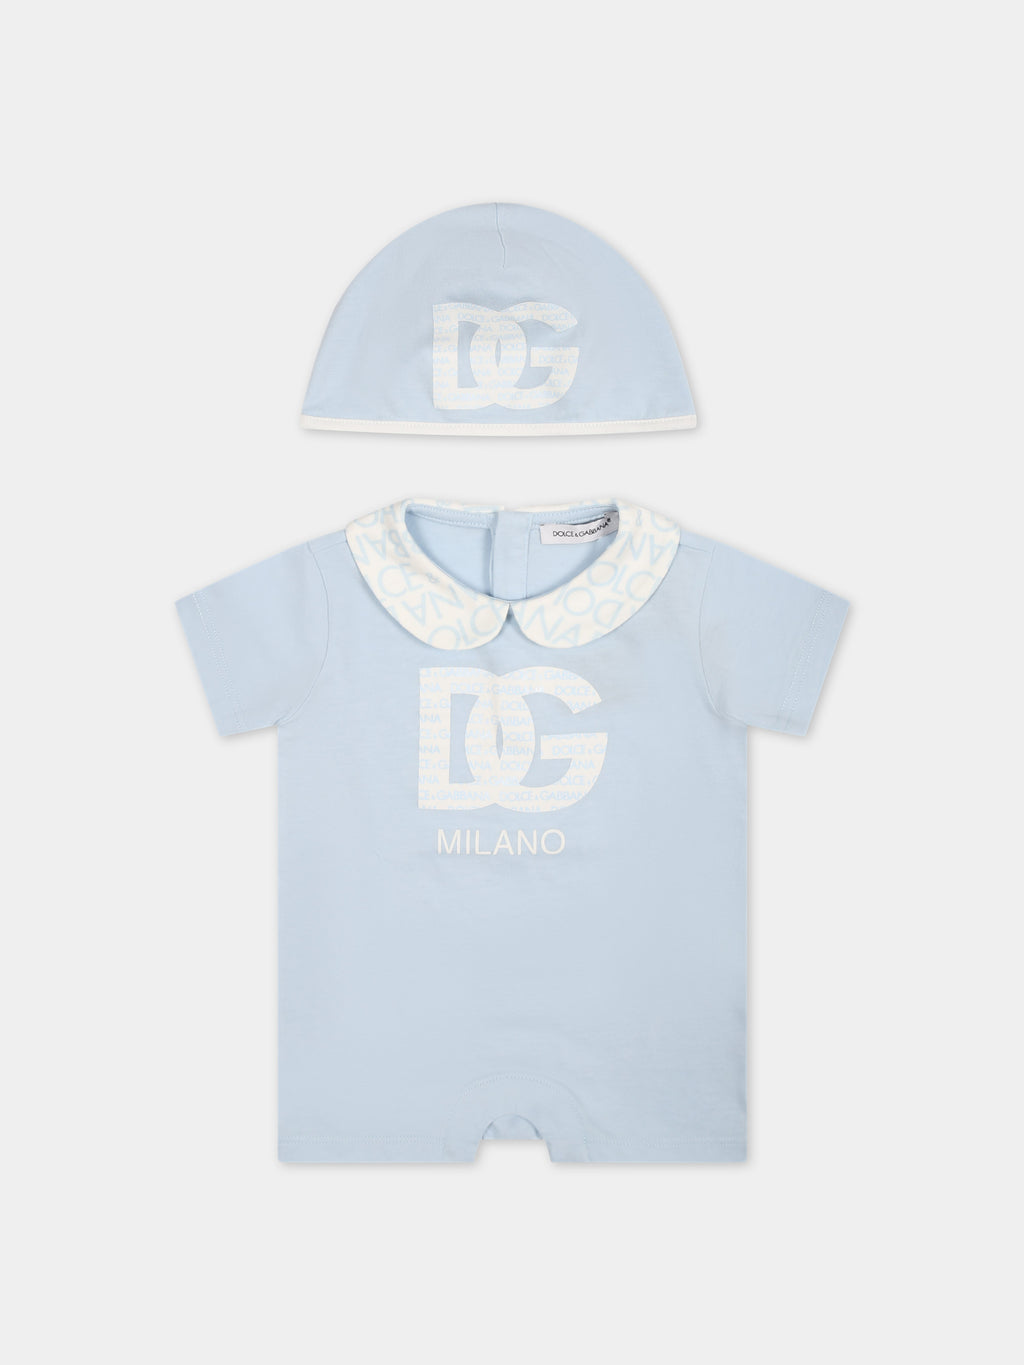 Light blue romper suit for baby boy with logo